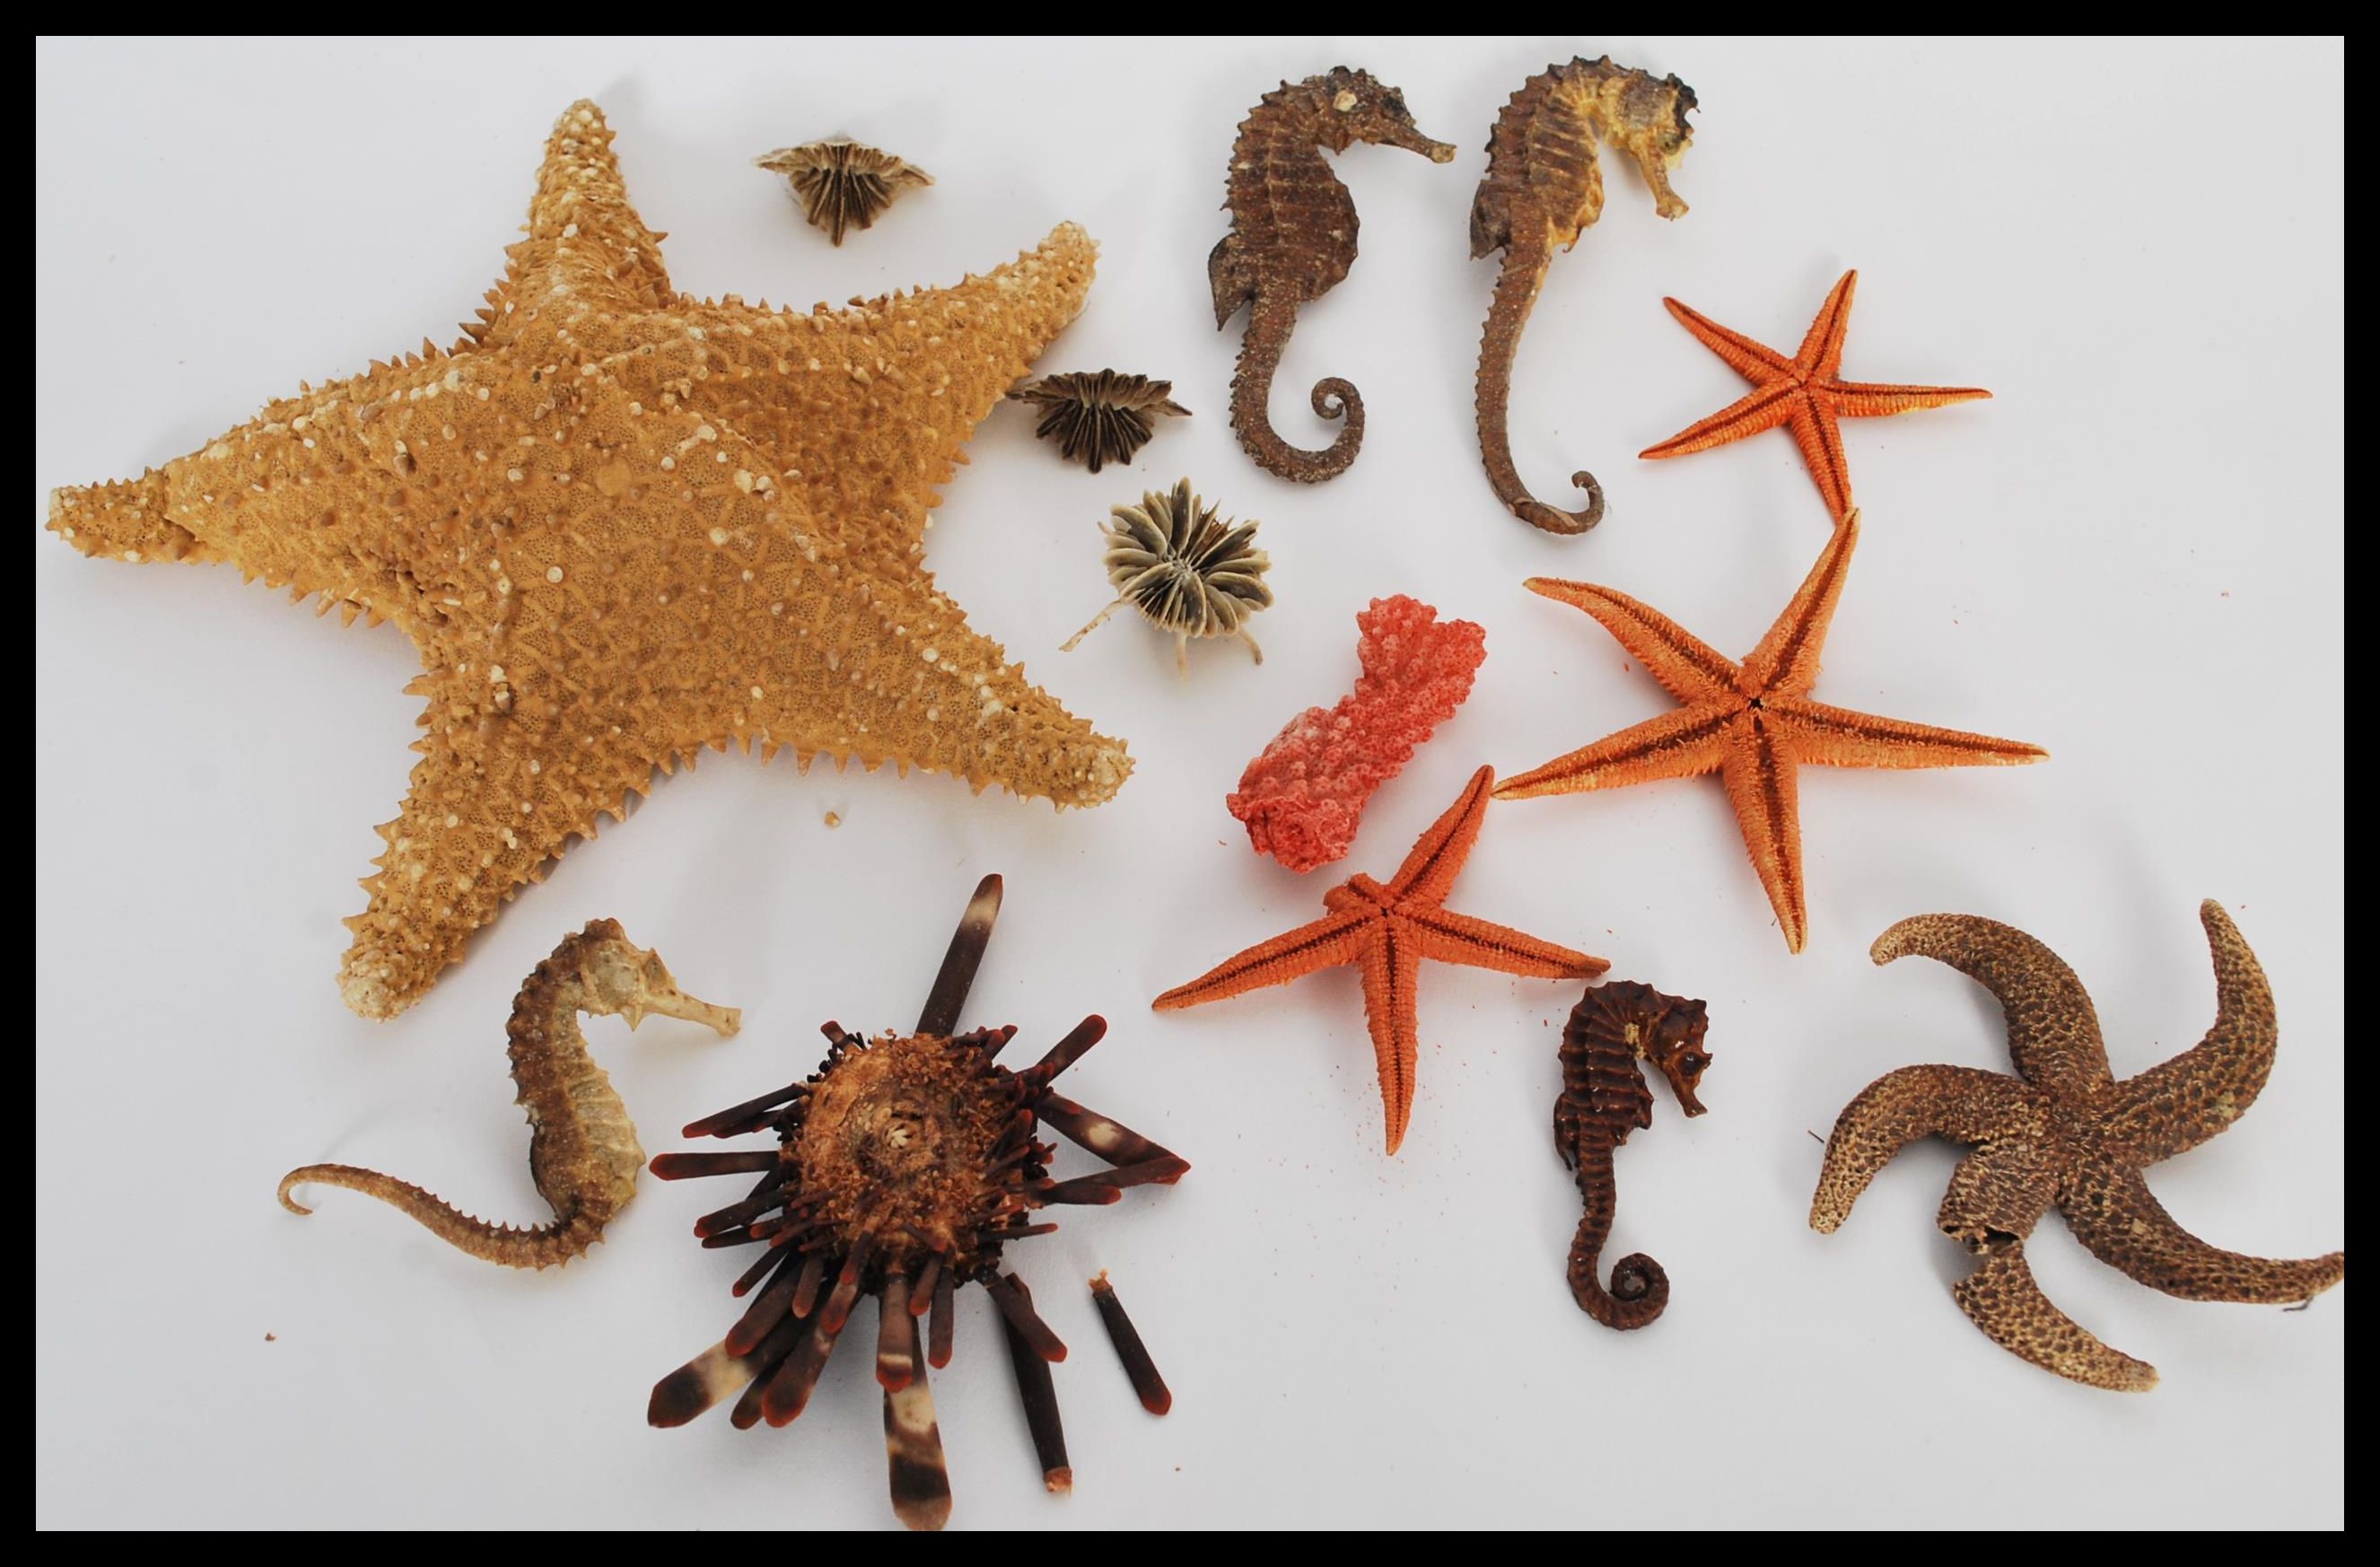 Starfish JM003 38.5 cms Giant Dissected Taxidermy Collection 100% natural Diving